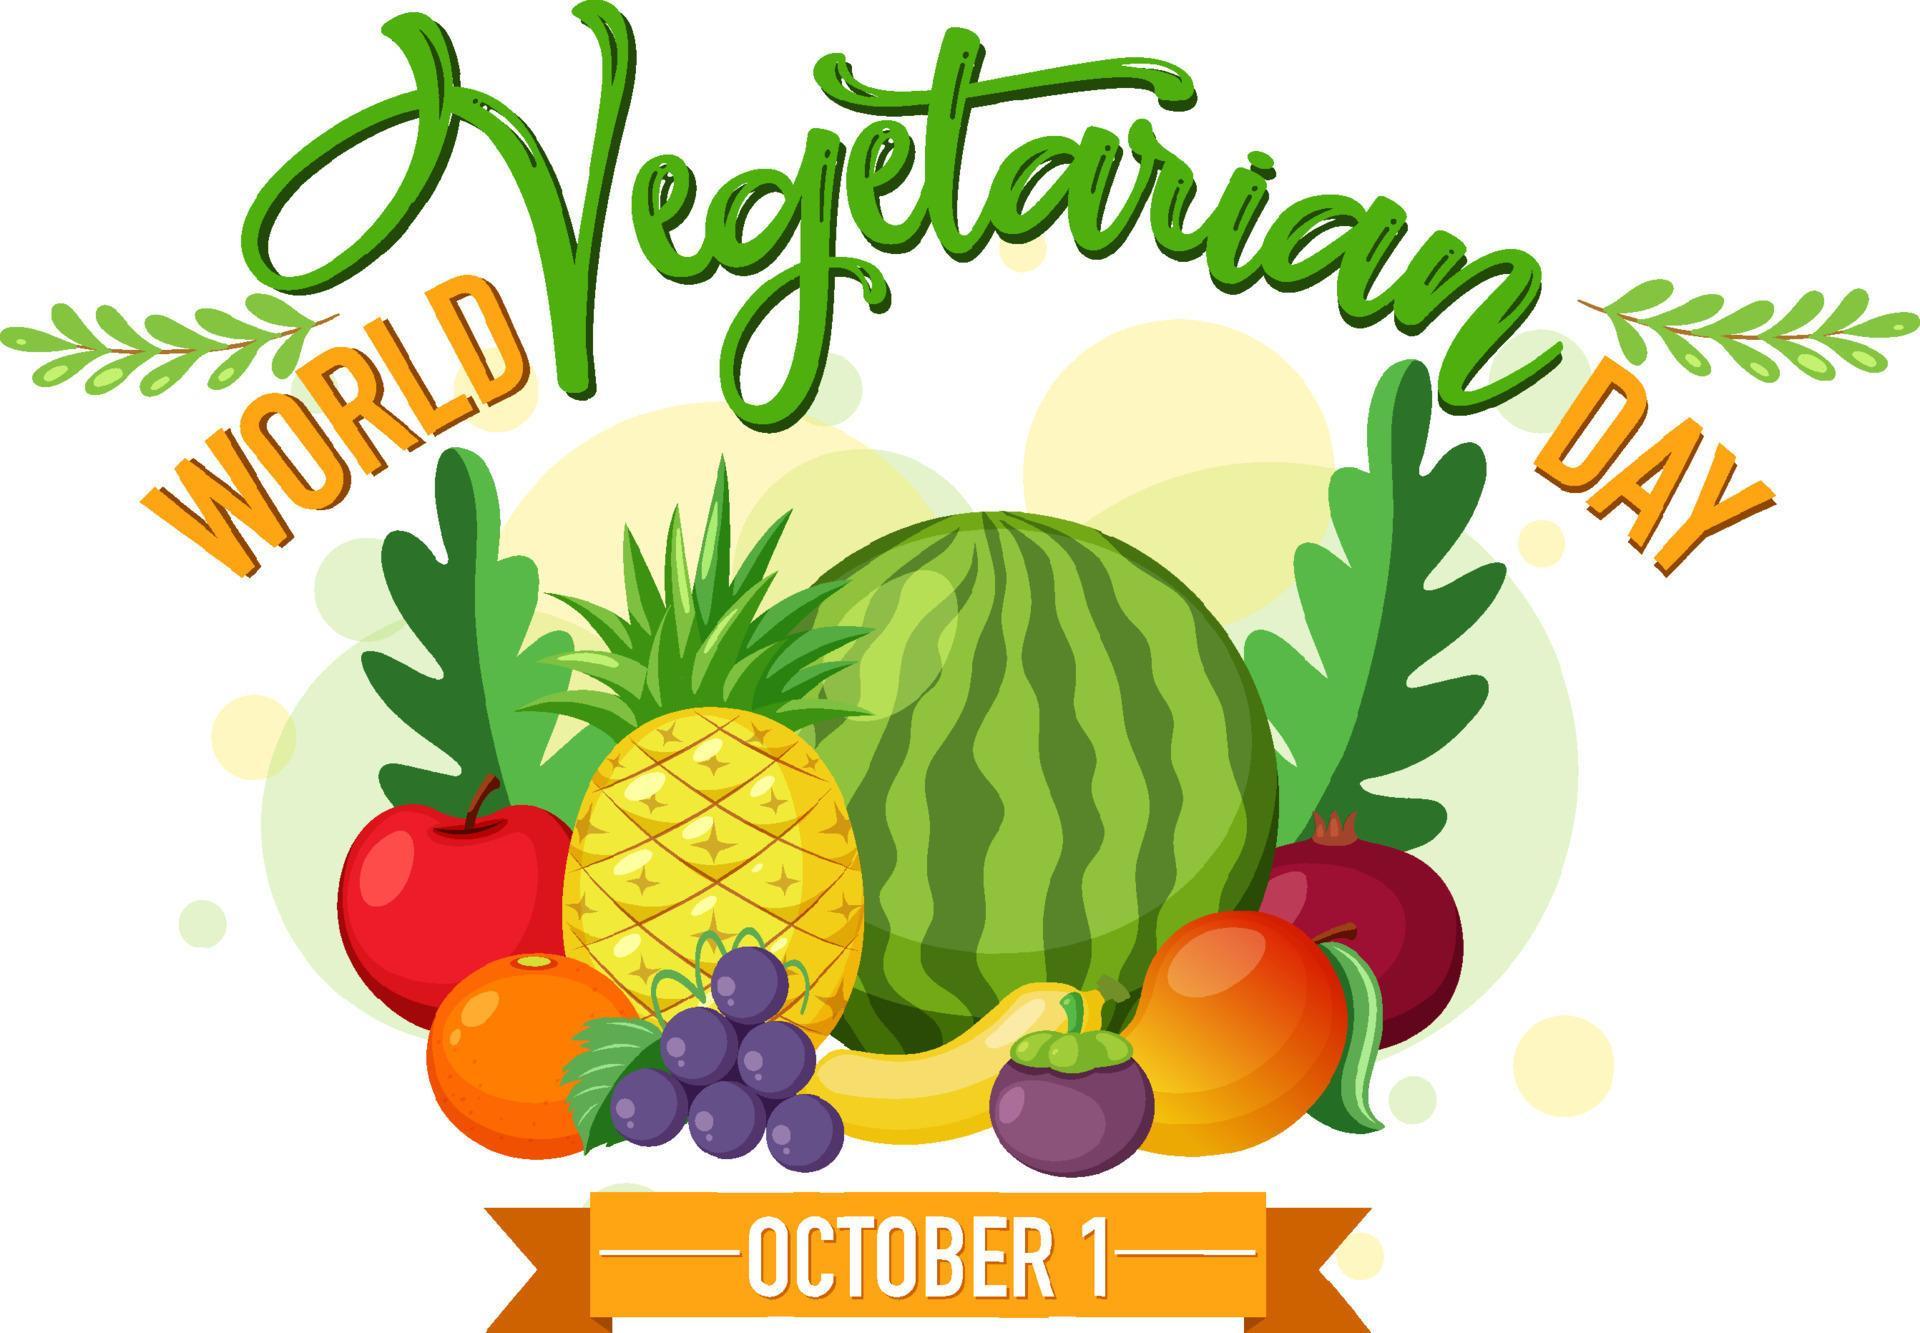 World Vegetarian Day logo with vegetable and fruit 4870680 Vector Art